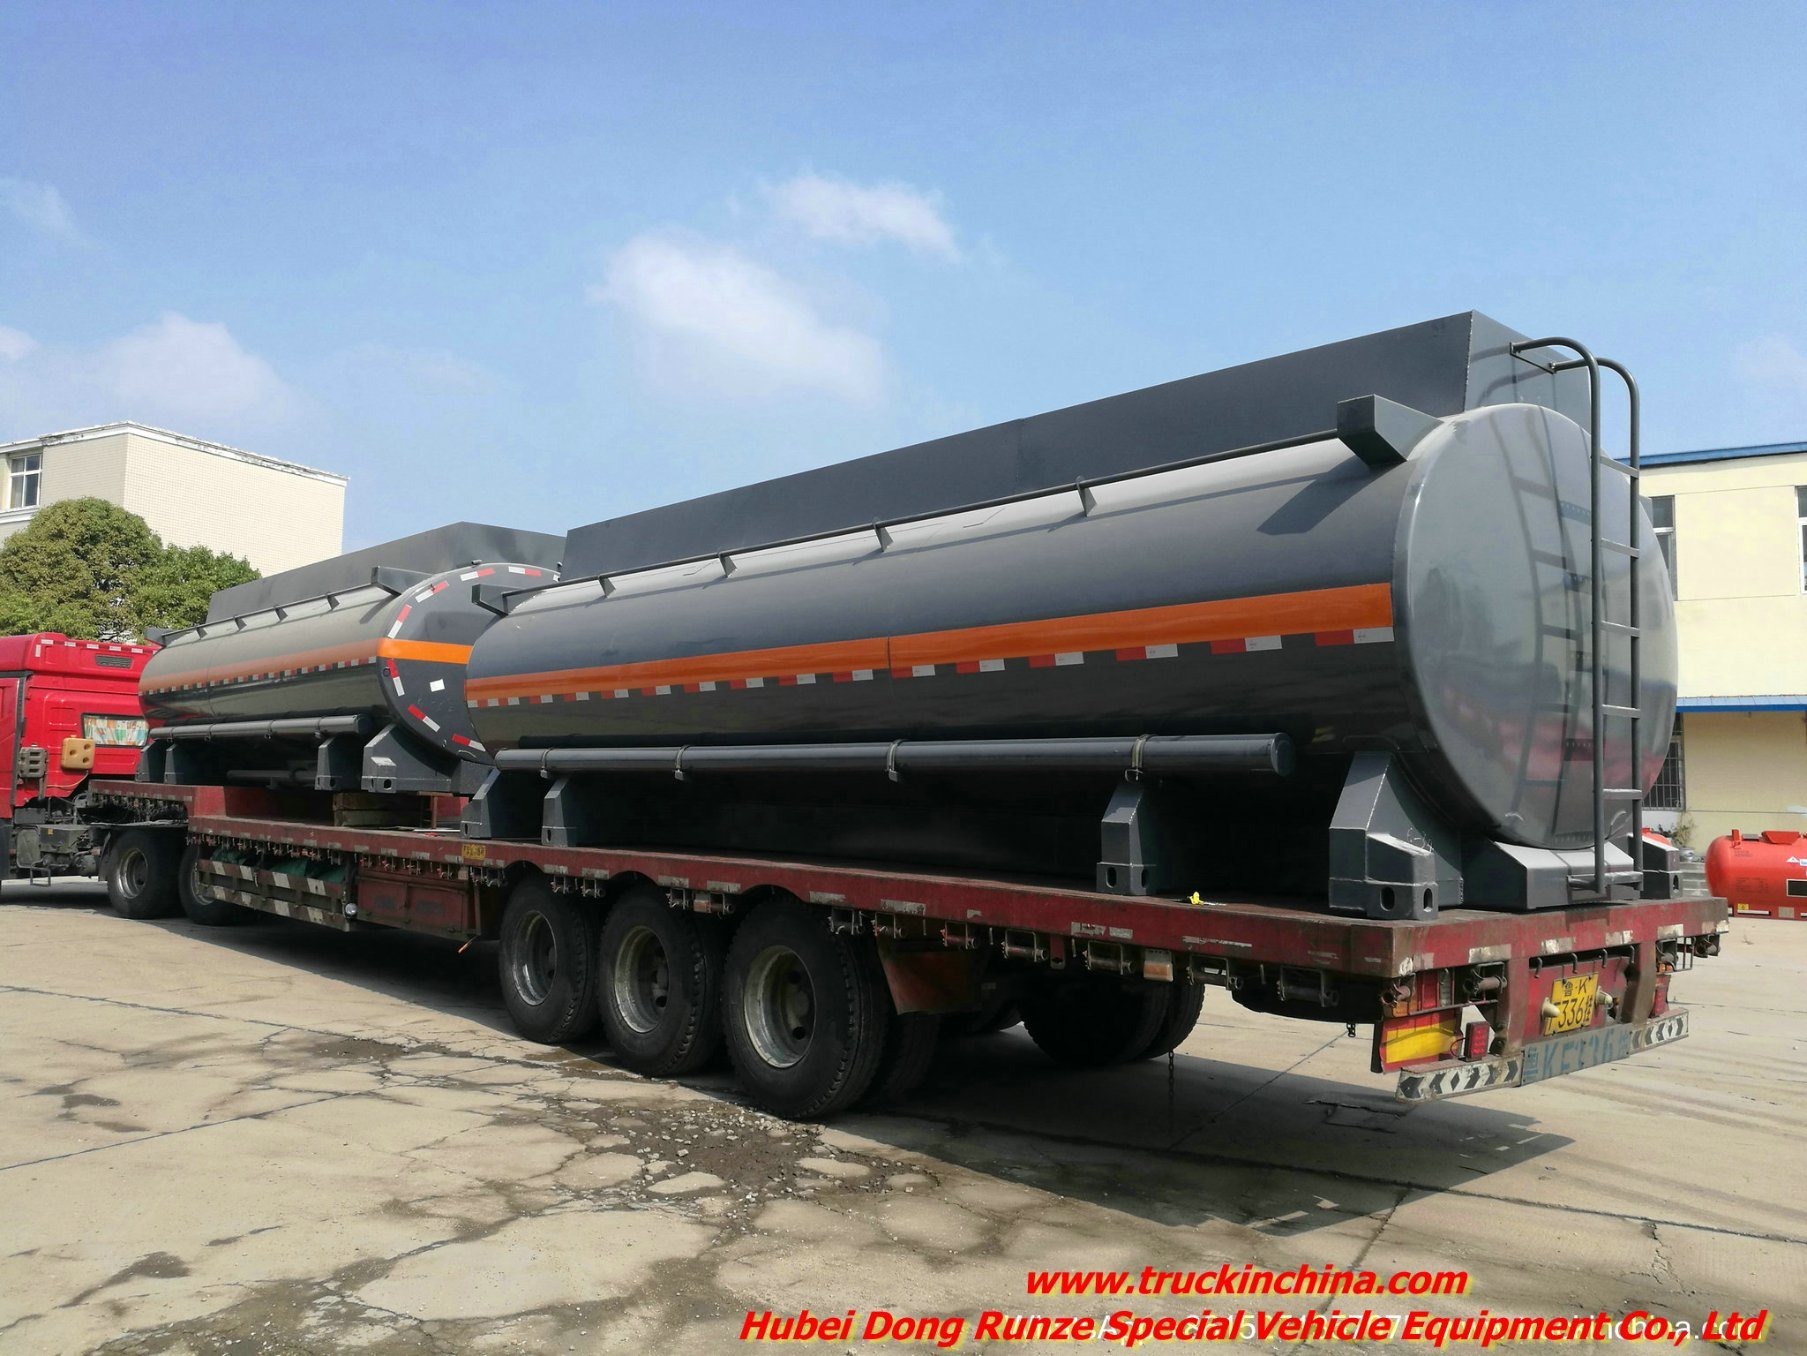 Chemical Liquid Tanker Body with Container Locks Trailer Road Transport 5000USG-6000USG (Solution HCl,NaOH,NaCLO,PAC,H2SO4,HF,H3PO4,H2O2 Store Tank Lined PE)